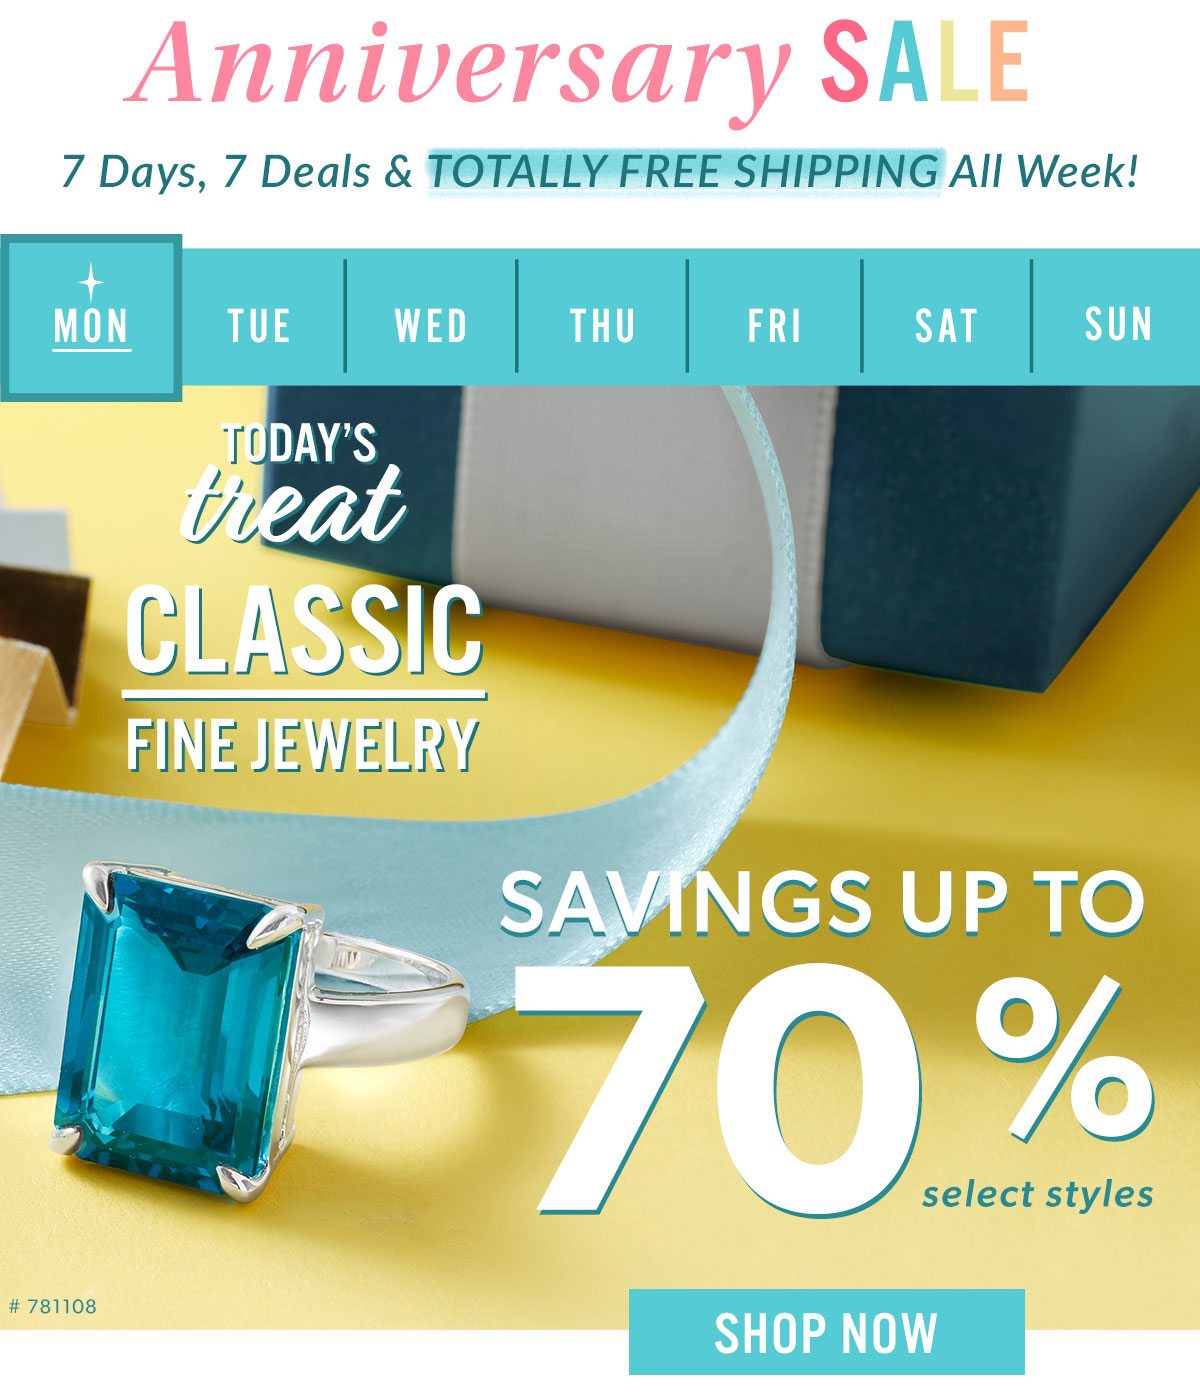 Anniversary Sale. 7 Days, 7 Deals & Totally Free Shipping All Week!